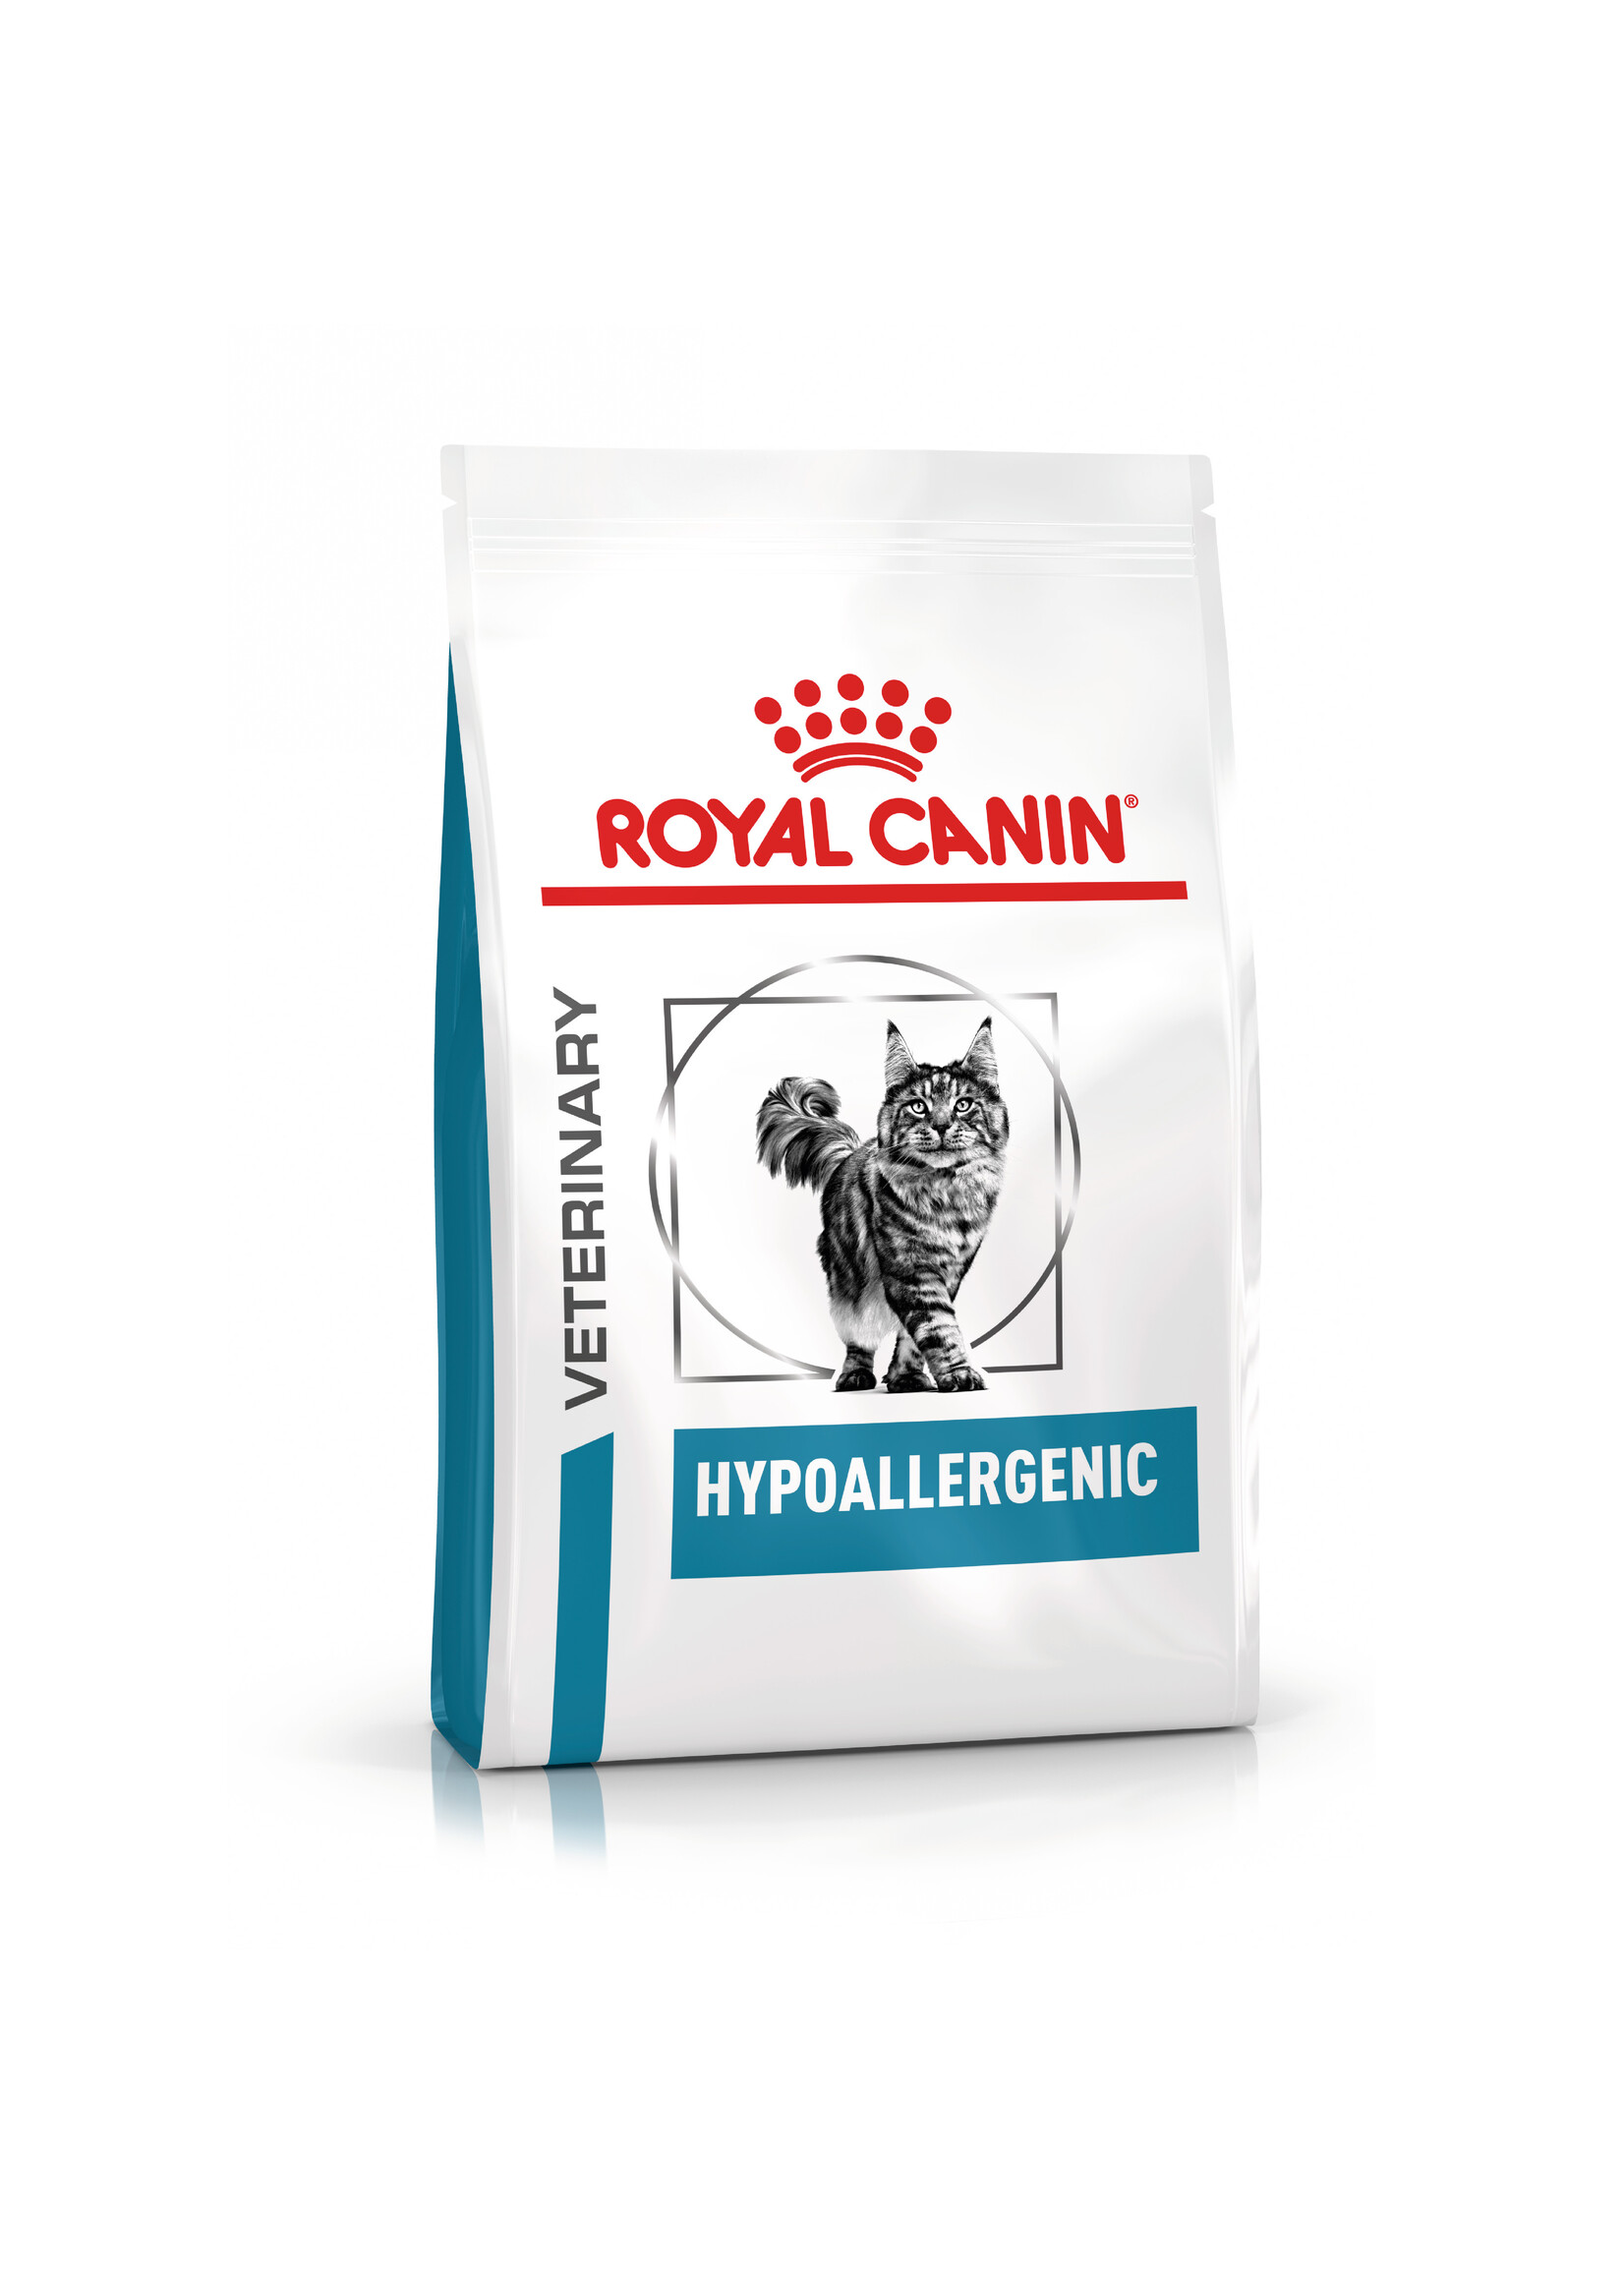 Royal Canin Royal Canin Hypoallergenic Cat